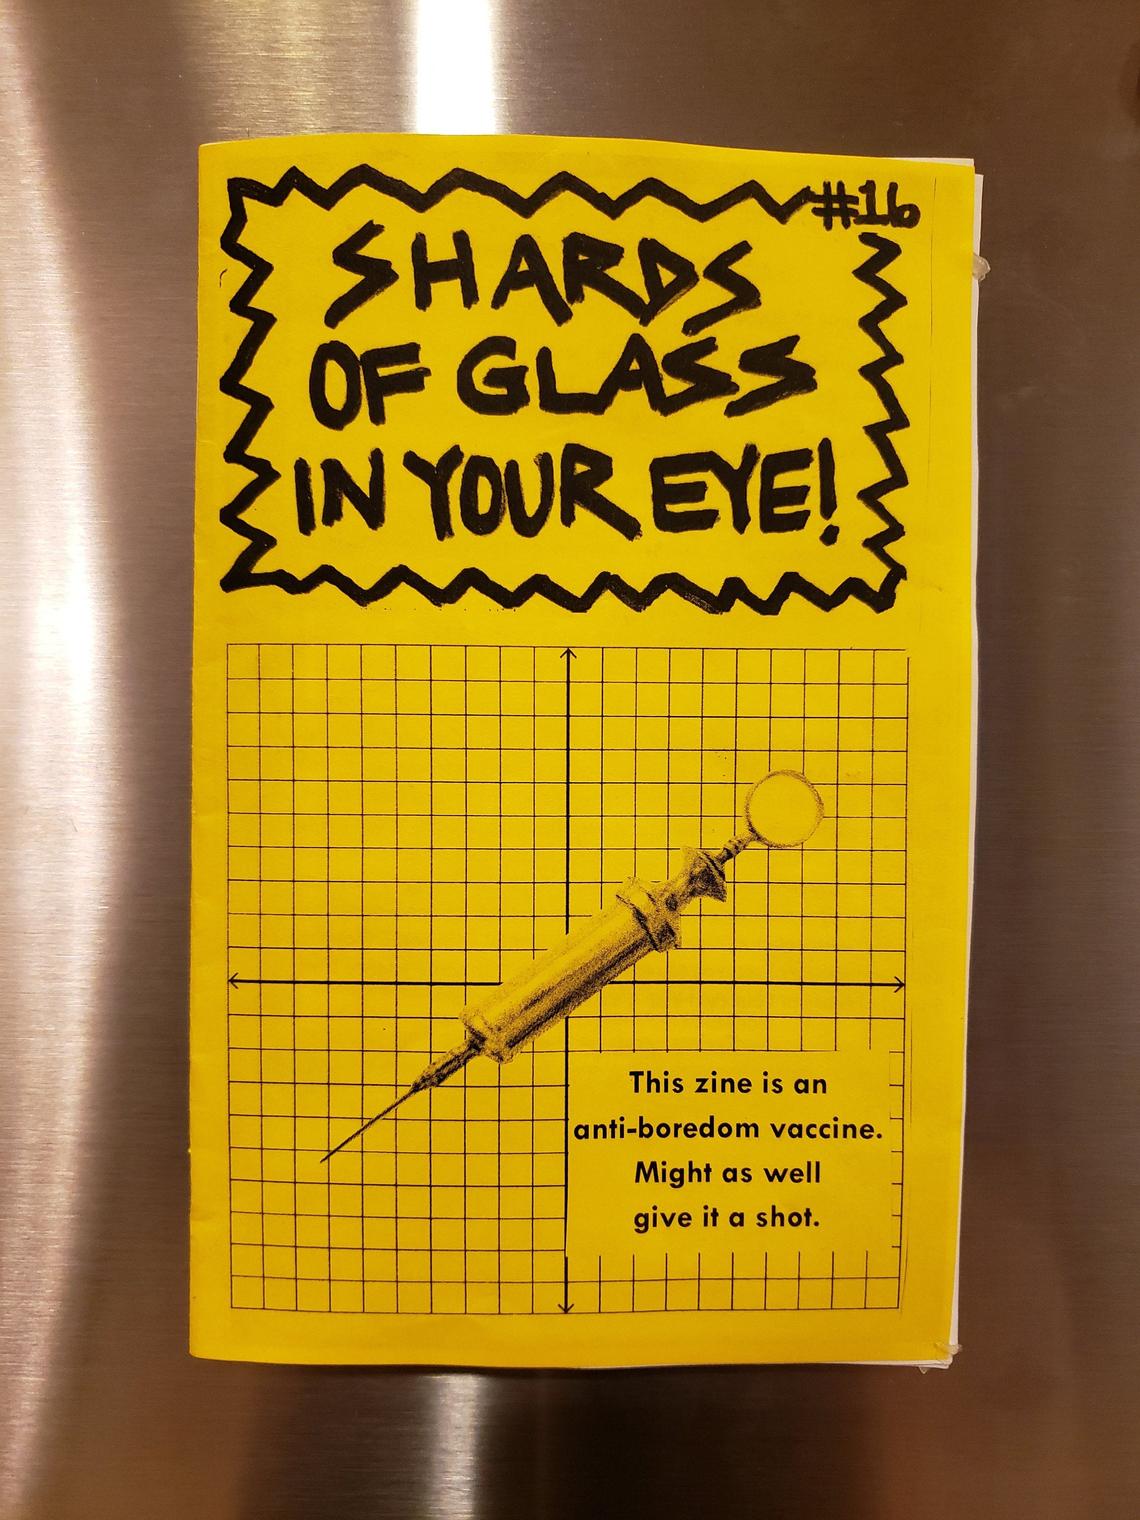 photo of zine: yellow cover, handwritten title, clip art syringe, "This zine is an anti-boredom vaccine. Might as well give it a shot."